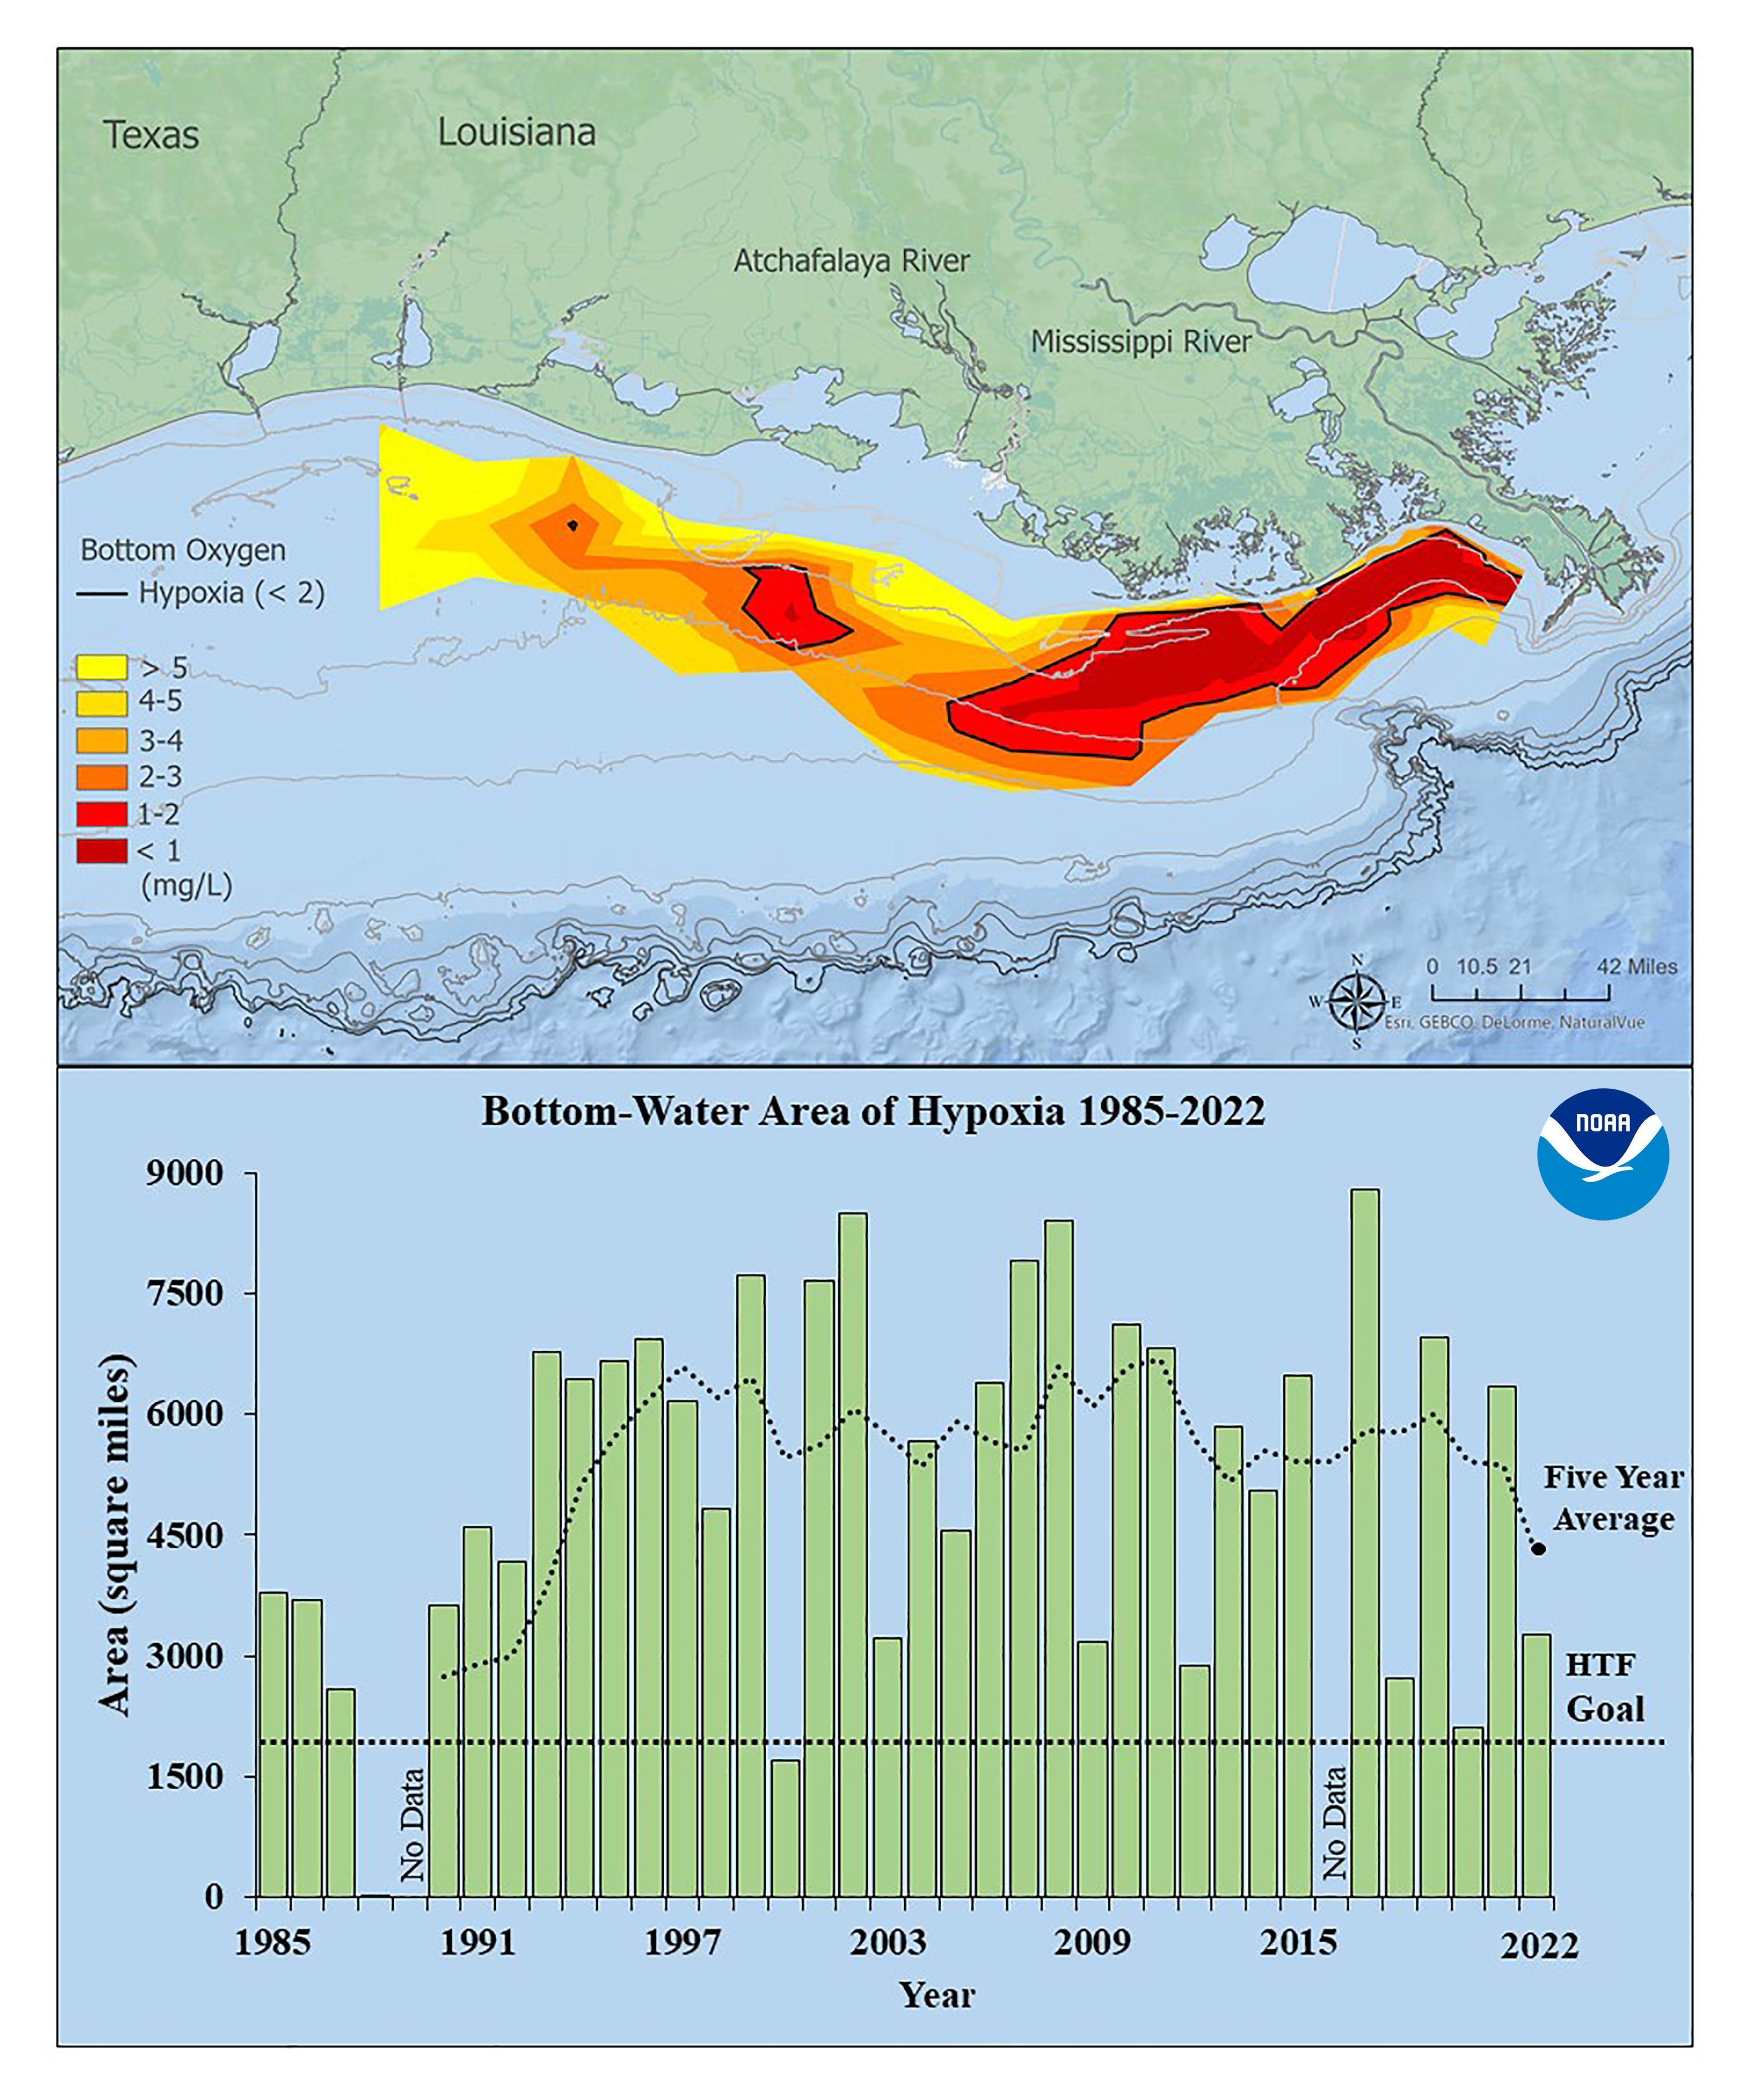 (Top) Map of measured Gulf hypoxia zone, July 25- August 1, 2022. Red area denotes 2 mg/L of oxygen or lower, the level which is considered hypoxic, at the bottom of the seafloor. (Bottom) Long-term measured size of the hypoxic zone (green bars) measured during the ship surveys since 1985, including the target goal established by the Mississippi River/Gulf of Mexico Watershed Nutrient Task Force and the 5-year average measured size (black dashed lines). 